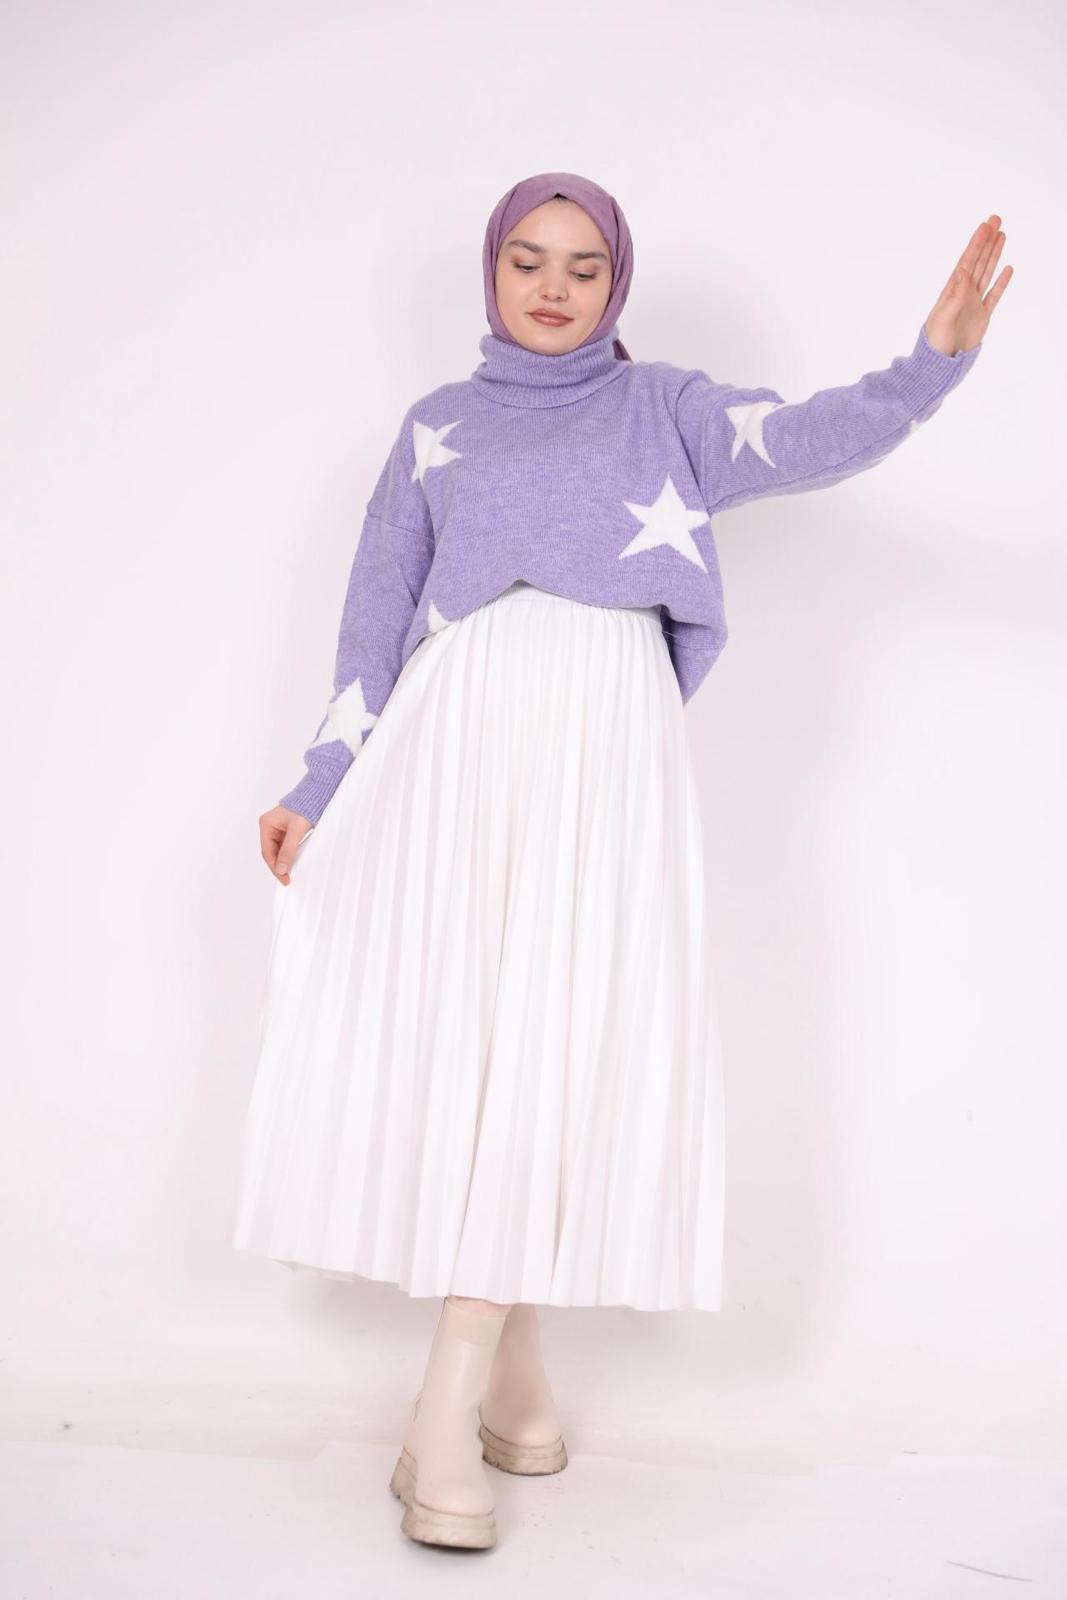 Turtleneck Star Patterned Sweater Lilac